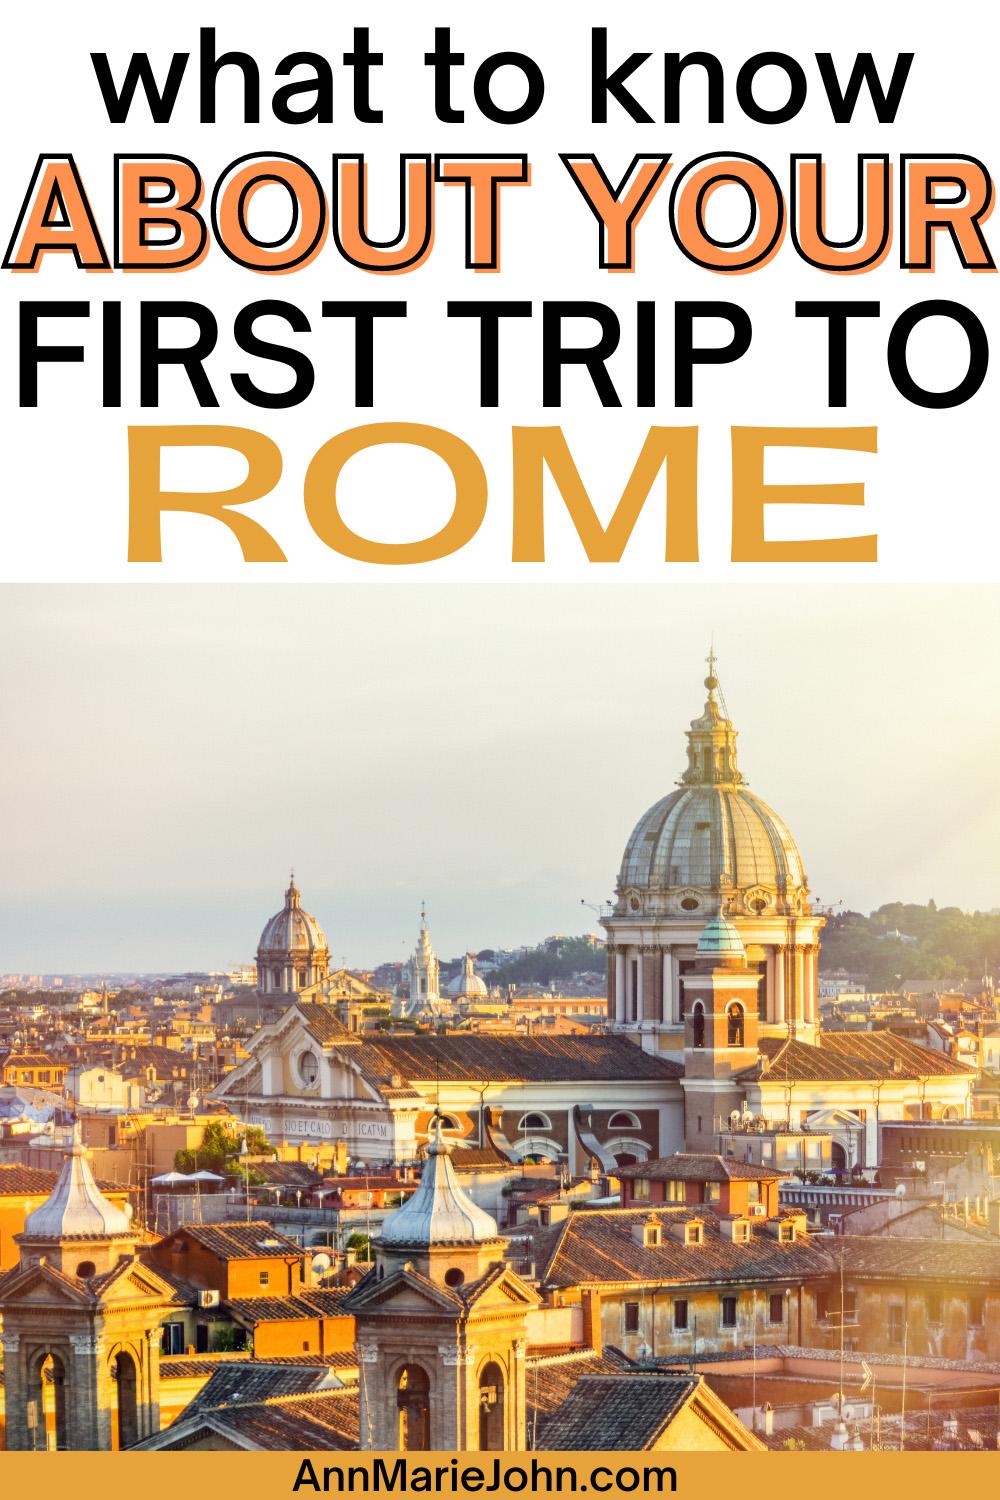 What to Know About Your First Trip to Rome